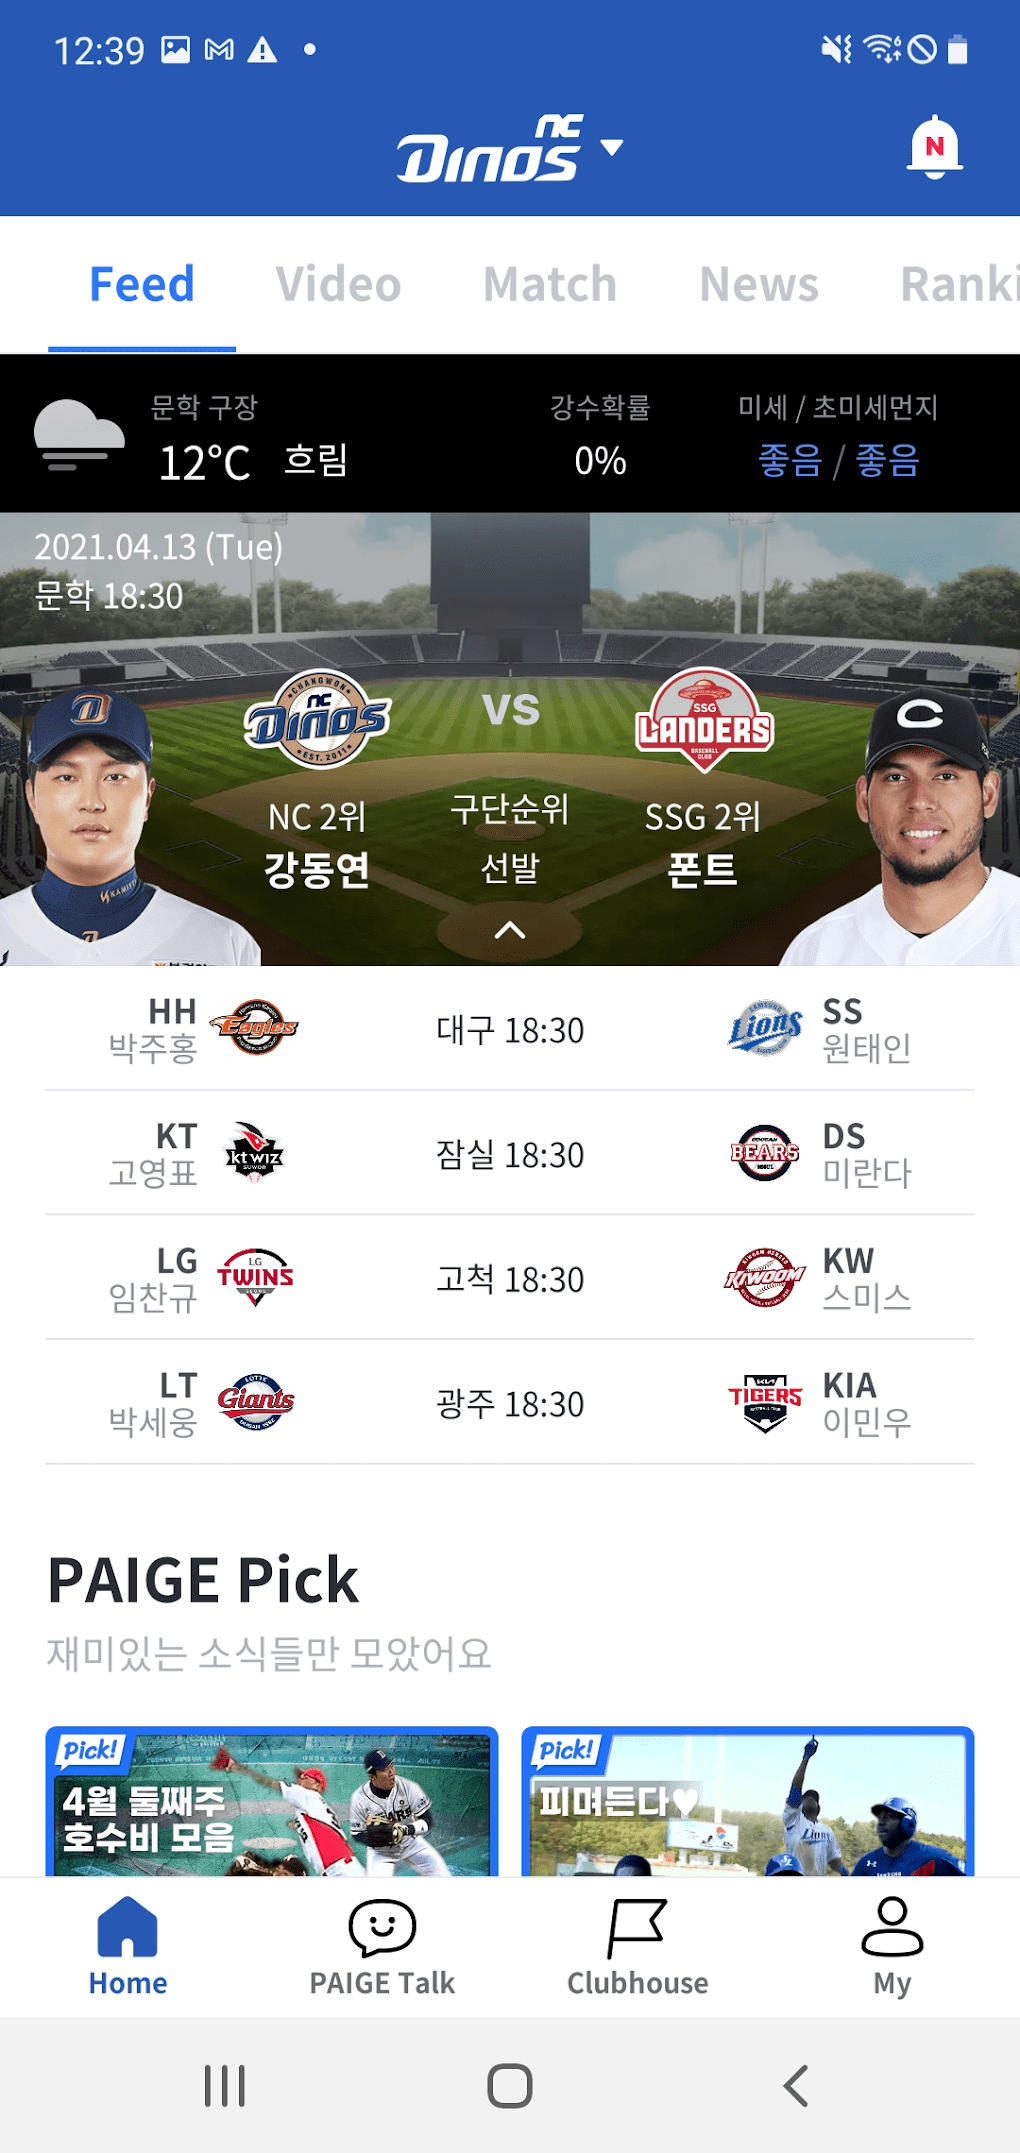 PAIGE - Baseball app for KBO for Android